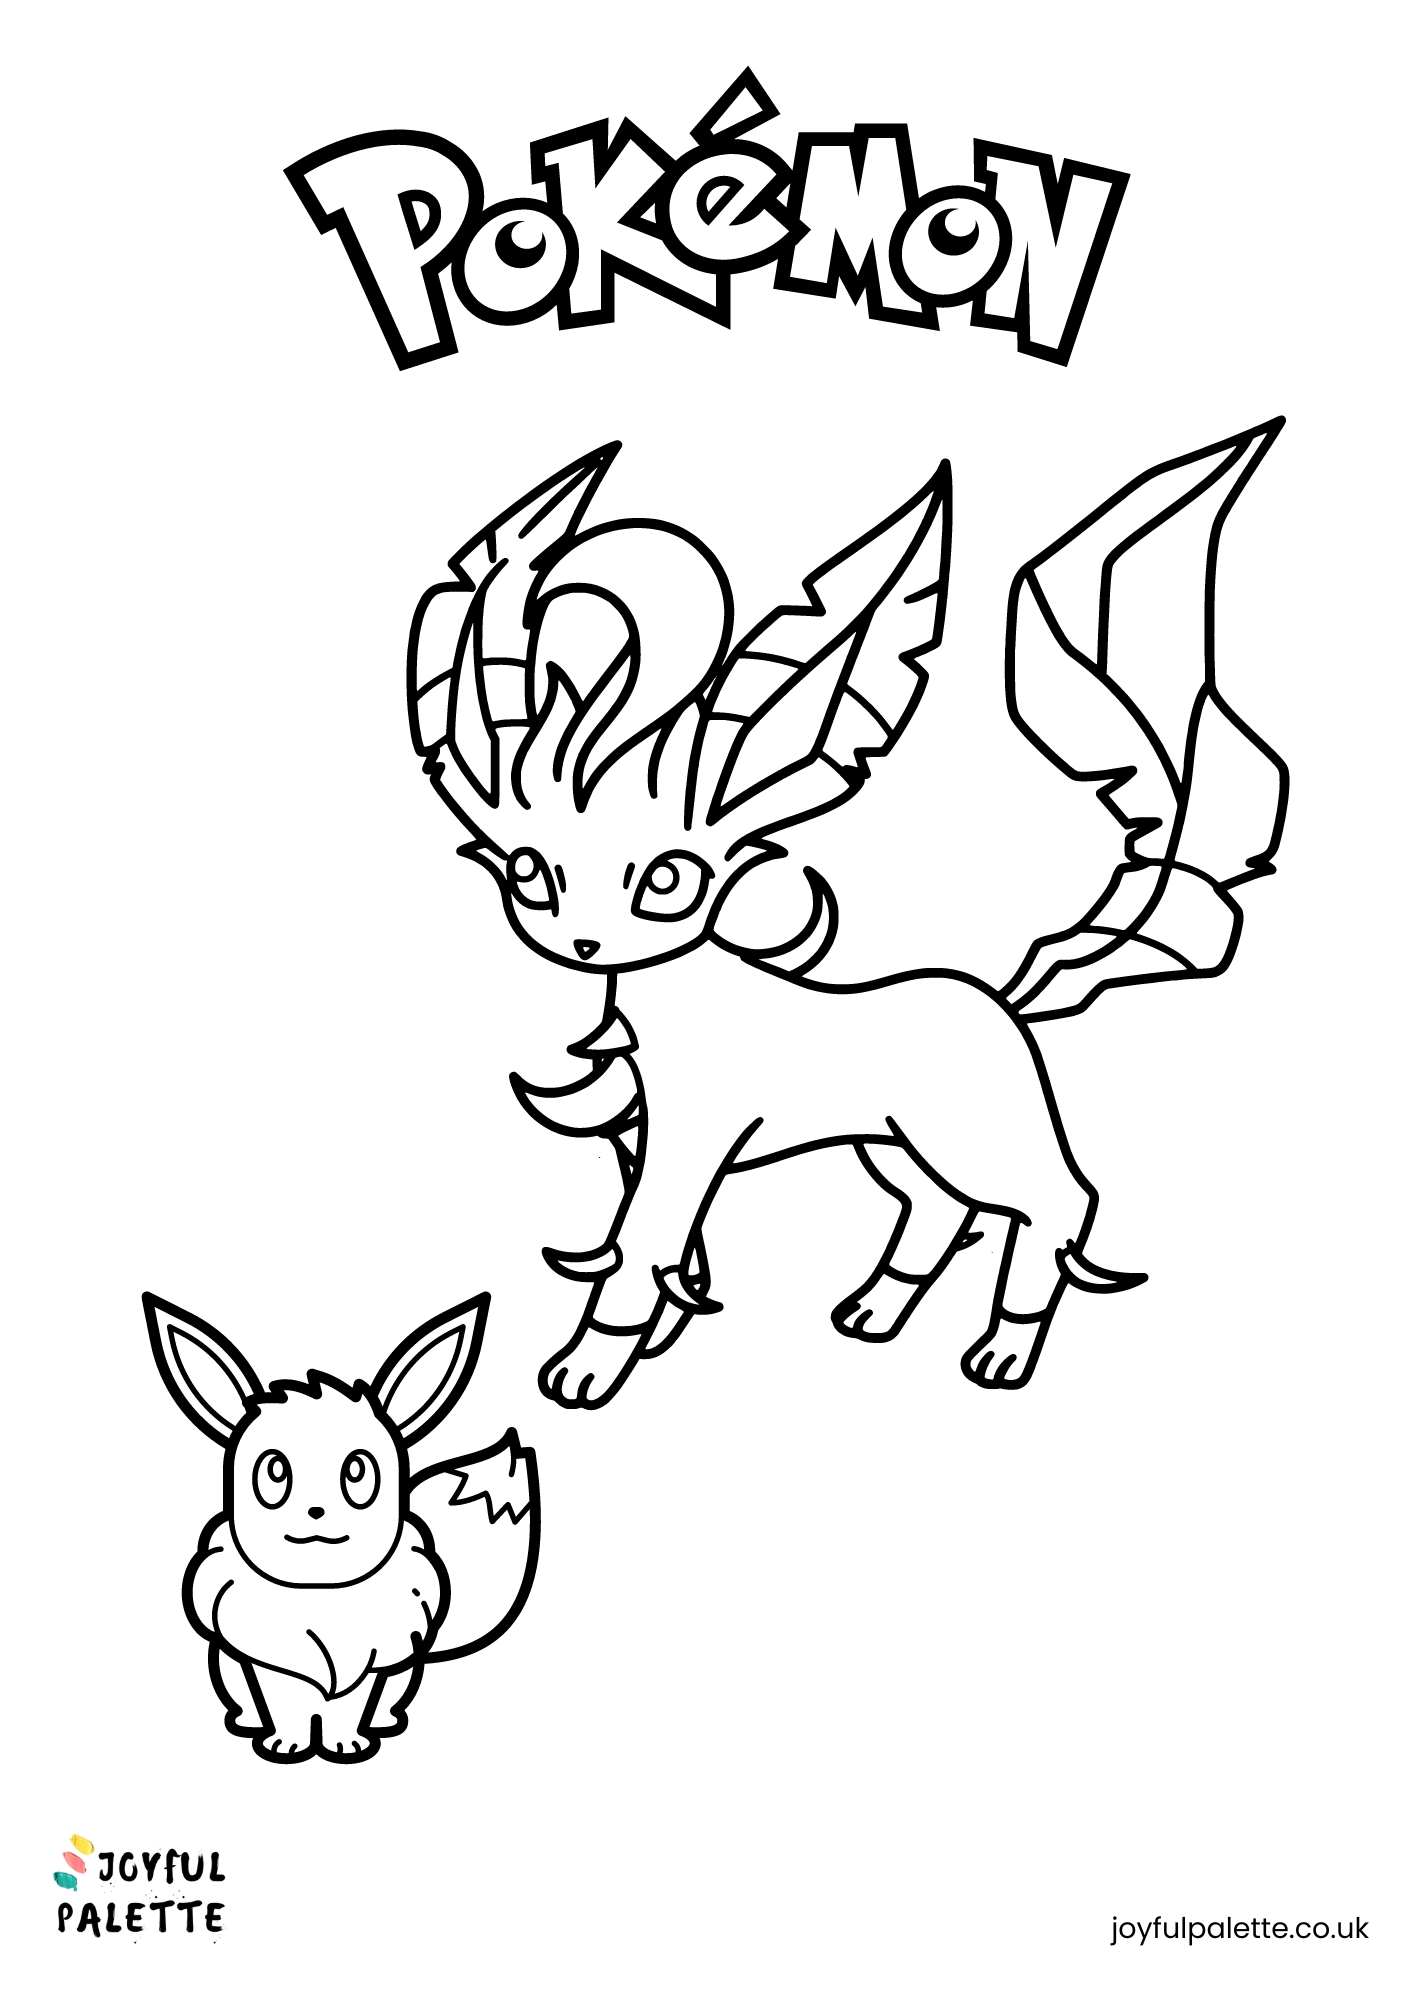 Eevee and Leafeon coloring sheets